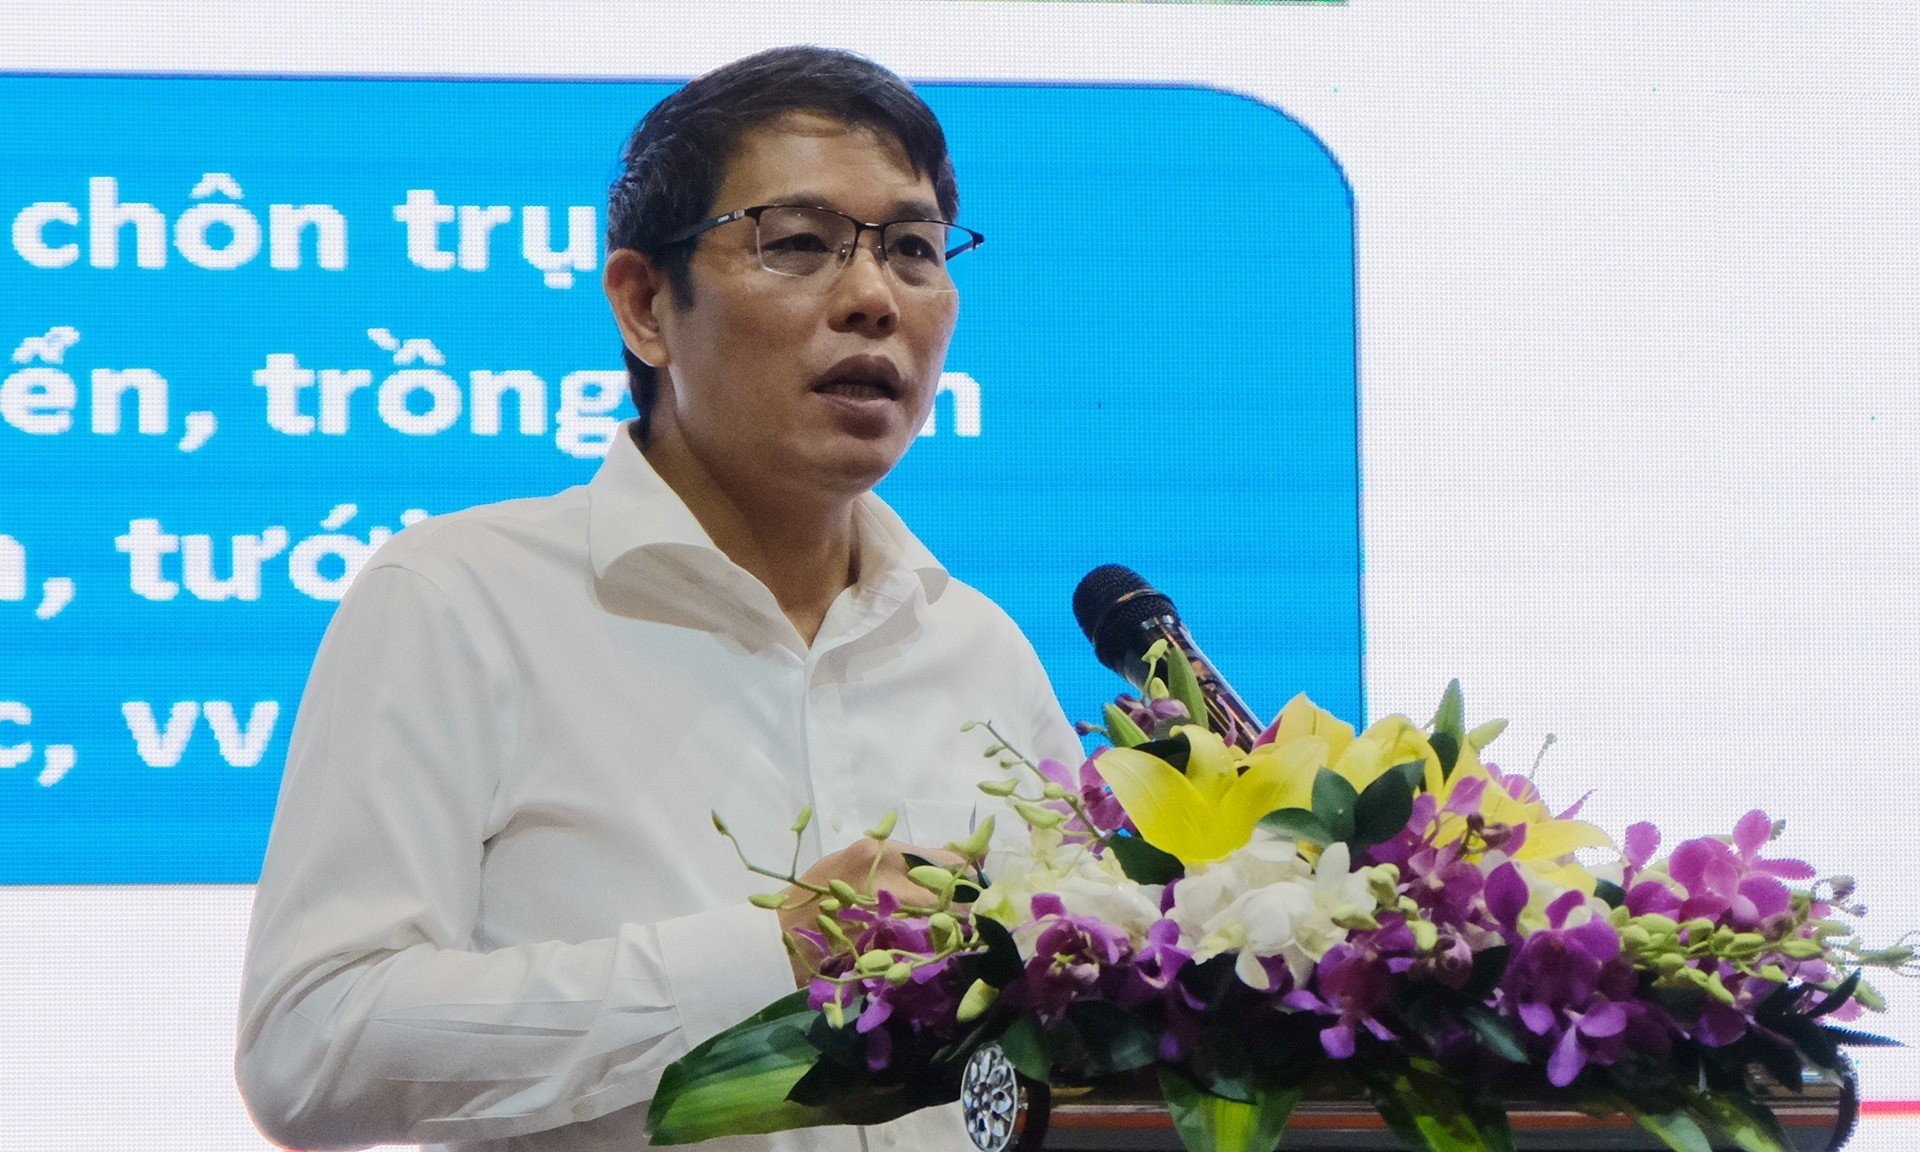 Mr. Vu Tan Phuong, consultant to the Agricultural NDC Project. Photo: Bao Thang.